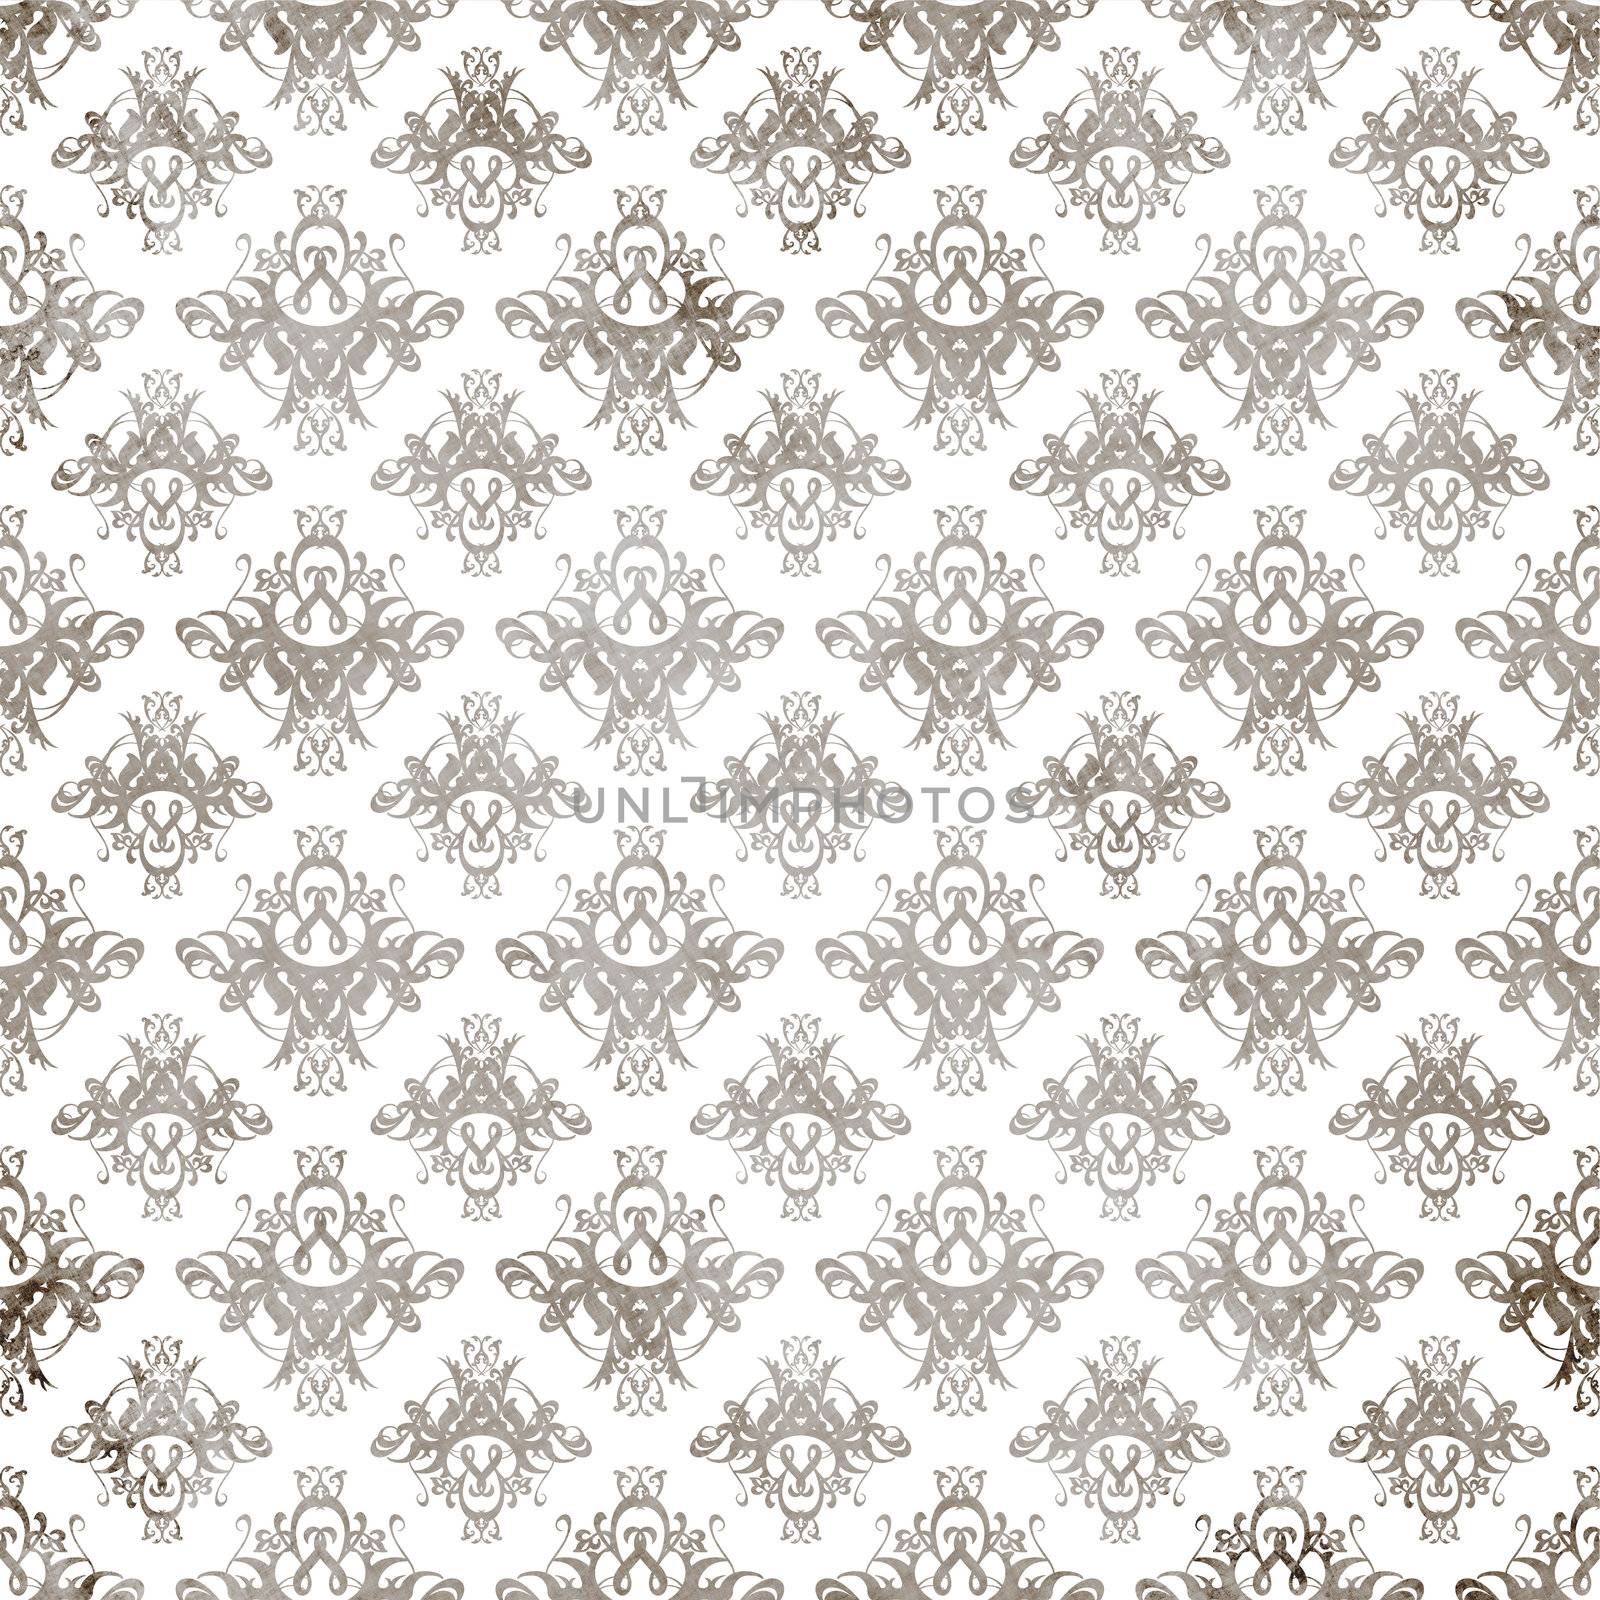 Antique Damask Pattern  by graficallyminded